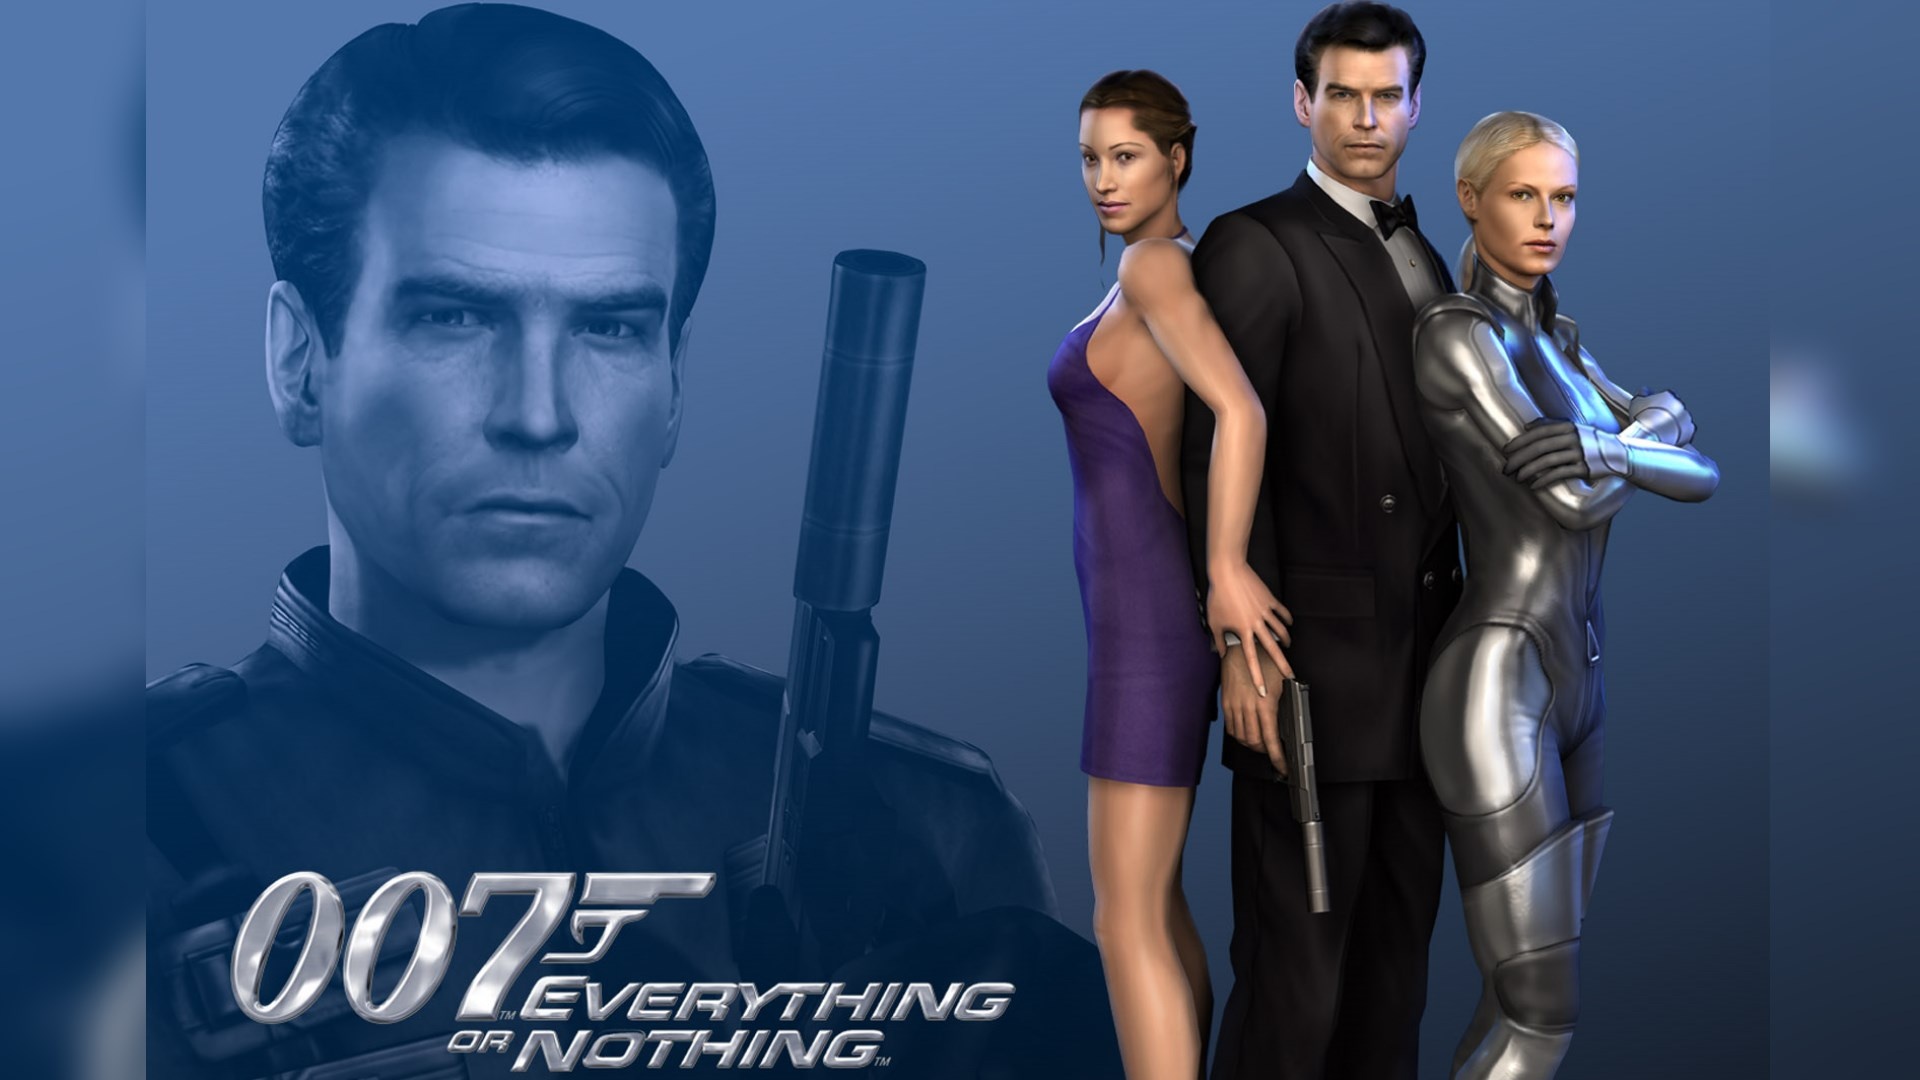 True bond game. James Bond 007 everything or nothing. Игра James Bond everything or. 007 Everything or nothing ps2. PLAYSTATION 2 Bond 007.